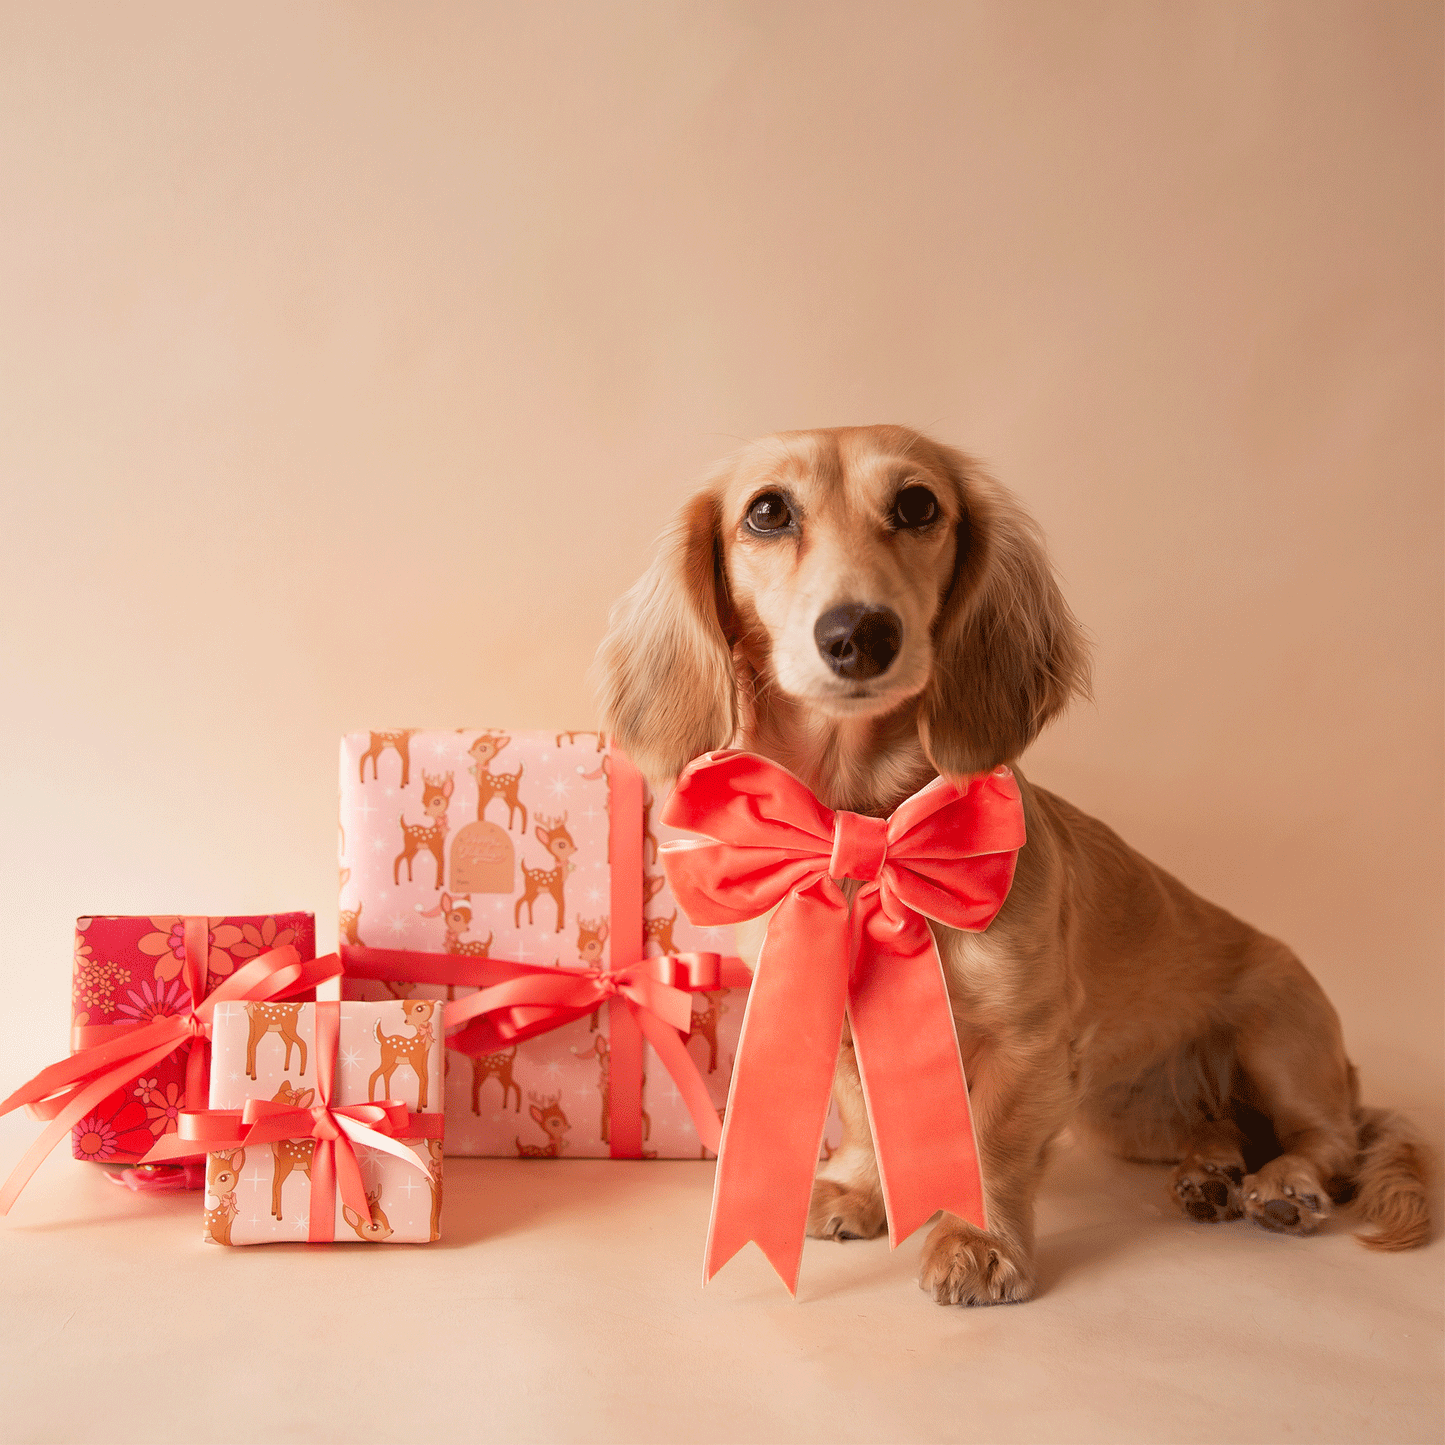 On a tan background is a dachshund sitting next to wrapped gifts and wearing our velvet bow in the shape peach.